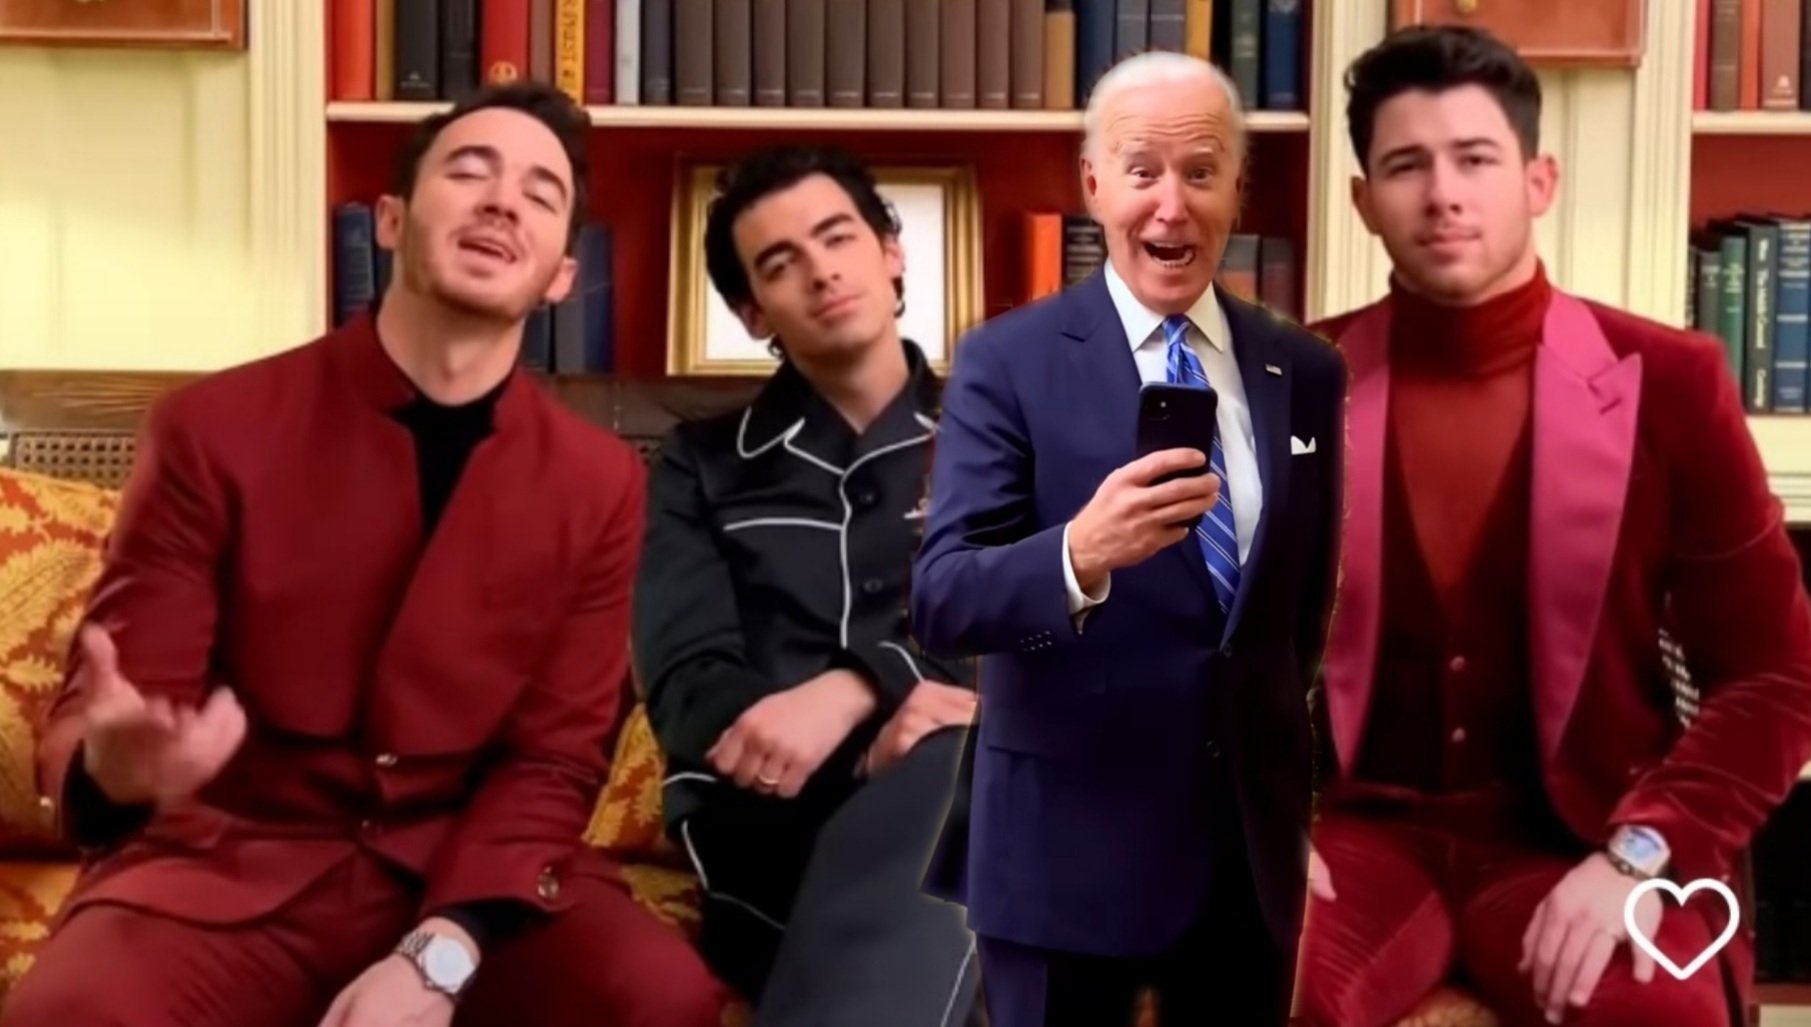  CRINGE: Biden Teams Up With Jonas Brothers to Shamelessly Peddle Vaccines in Stomach-Turning Propaganda Video